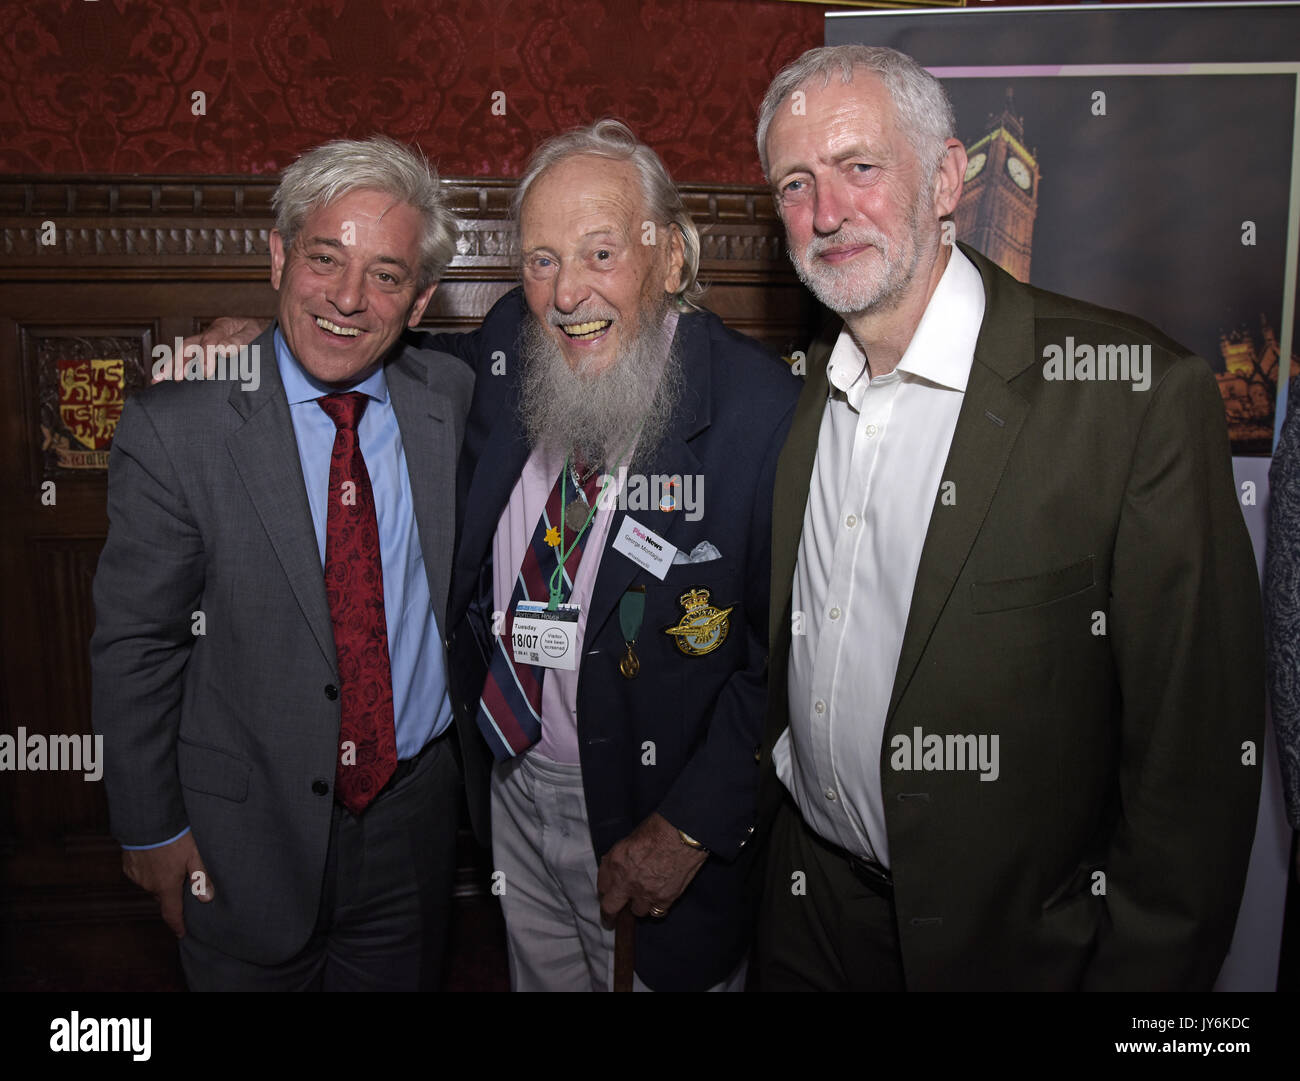 Summer reception and announcement of the Pink News Awards 2017 in The Palace of Westminster, The Speaker’s House  Featuring: John Bercow, George Montague, Jeremy Corbyn Where: London, United Kingdom When: 18 Jul 2017 Credit: Chris Jepson/WENN.com Stock Photo